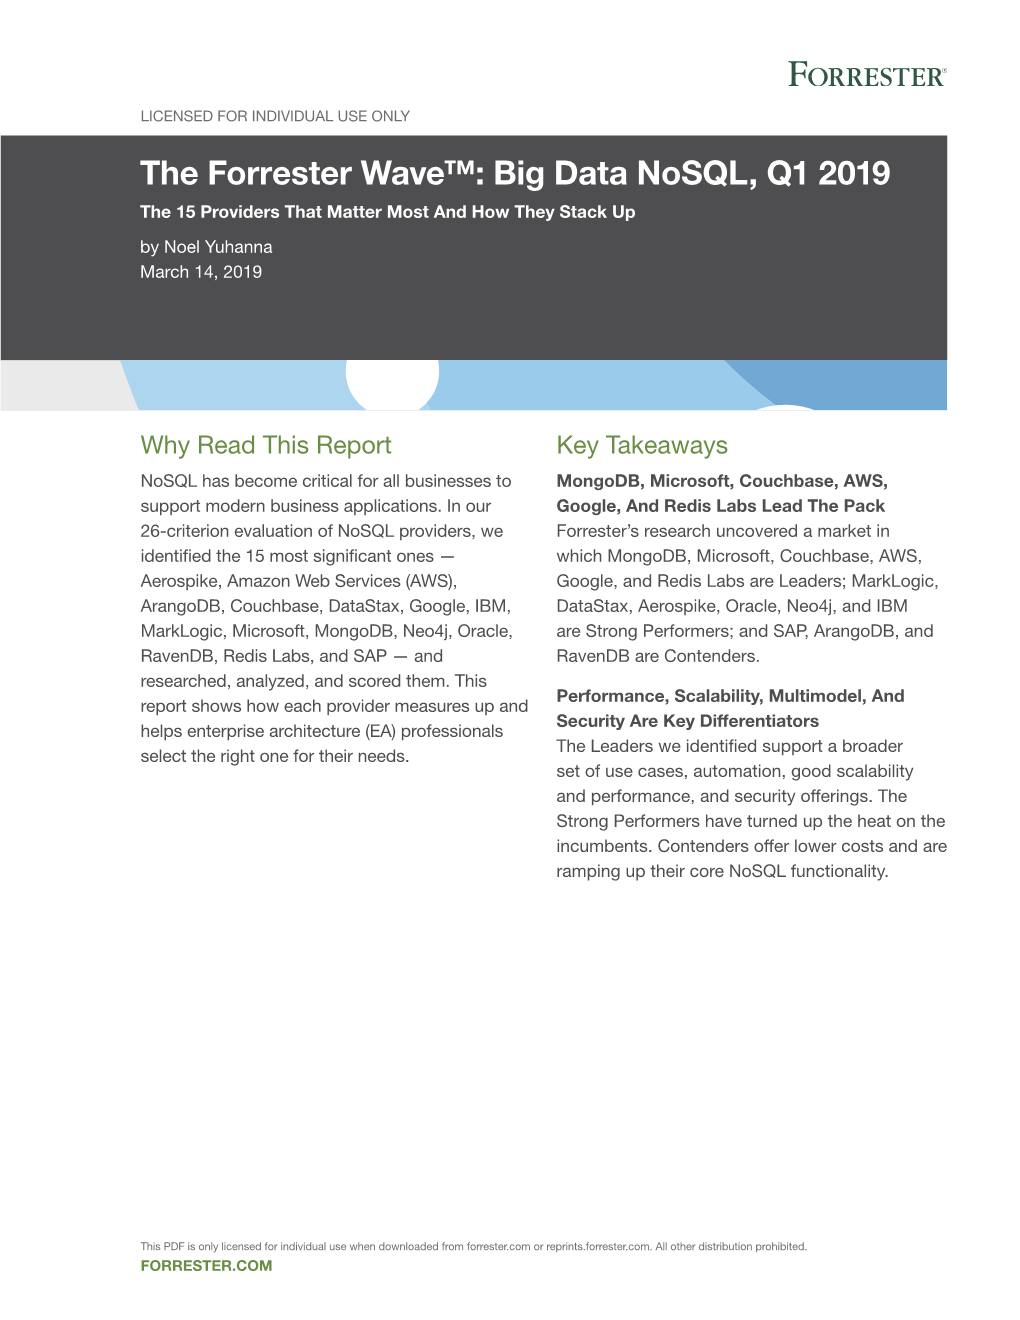 The Forrester Wave™: Big Data Nosql, Q1 2019 the 15 Providers That Matter Most and How They Stack up by Noel Yuhanna March 14, 2019